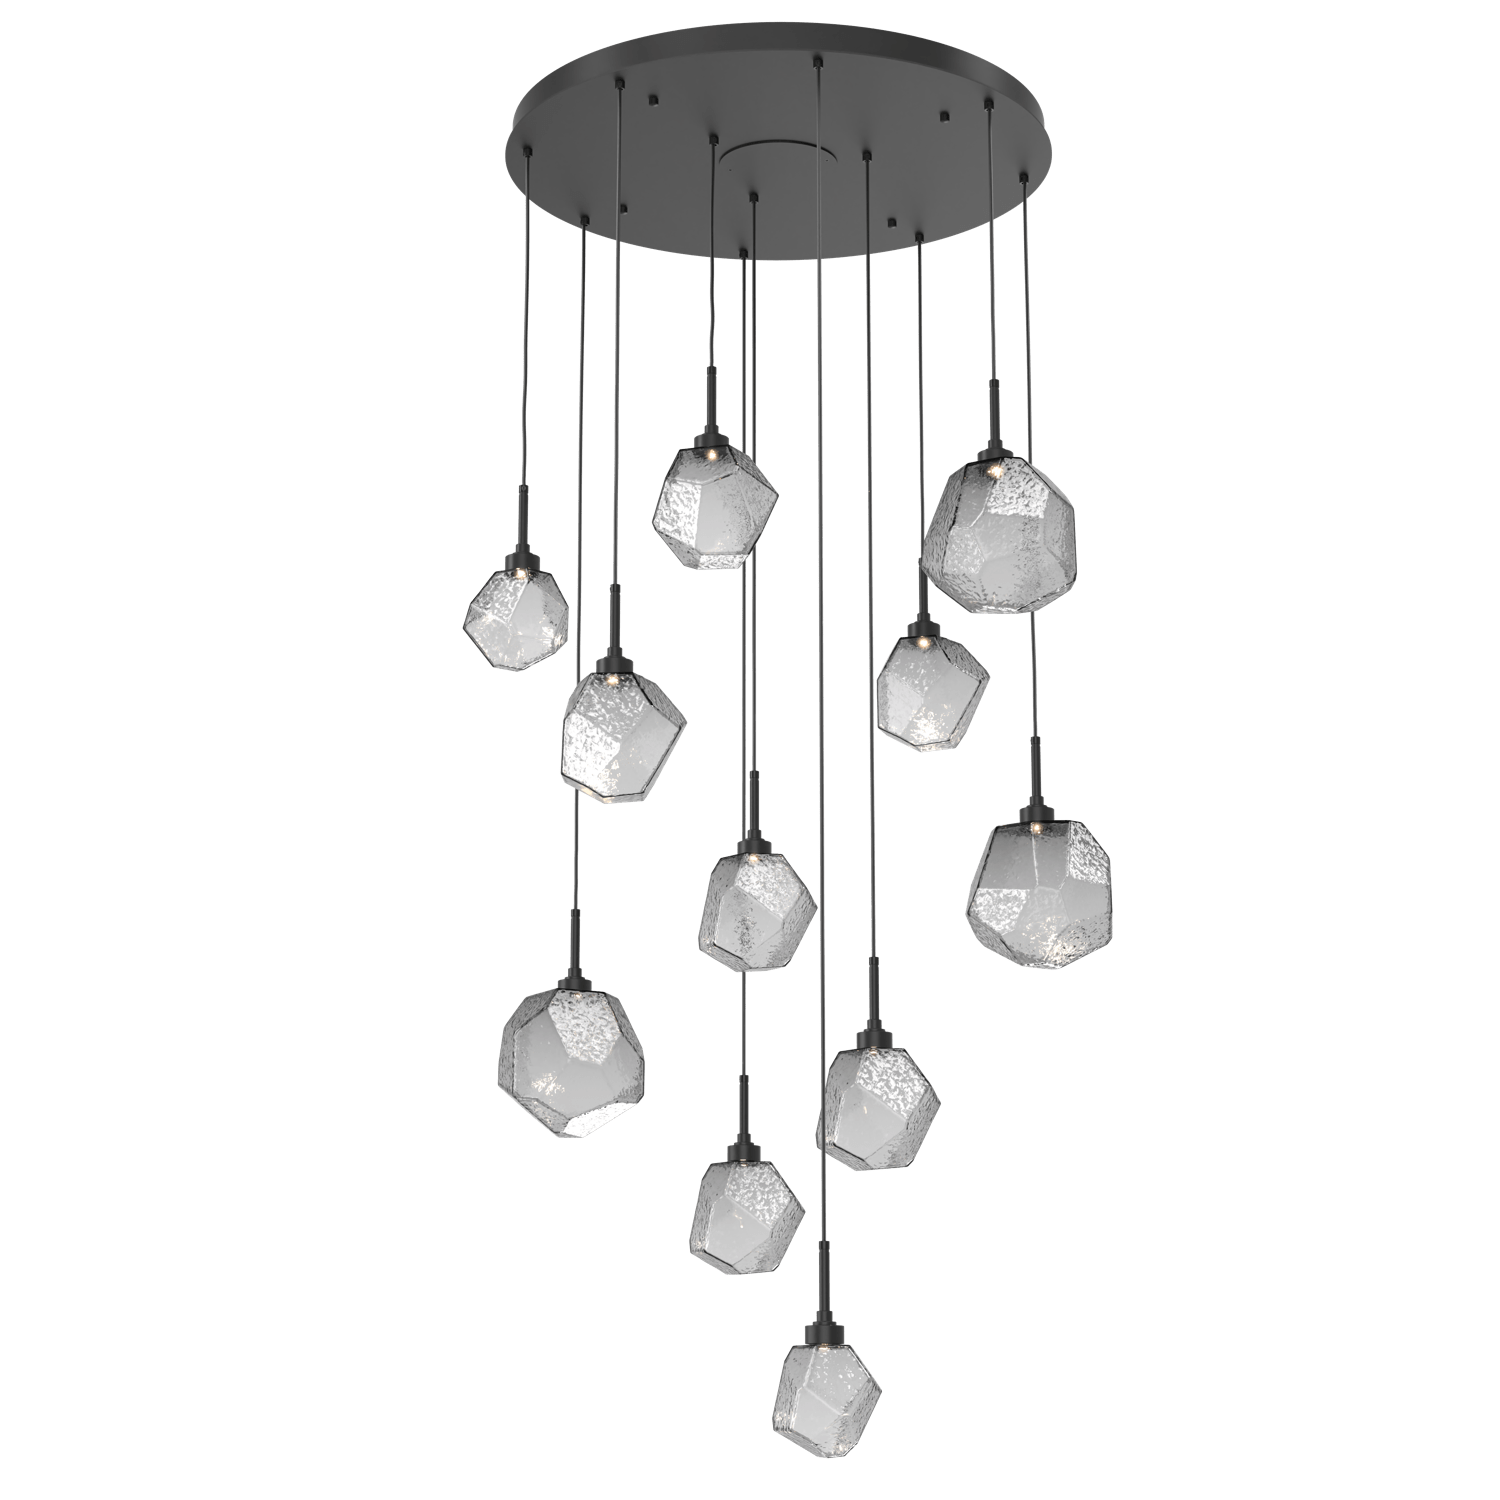 CHB0039-11-MB-S-Hammerton-Studio-Gem-11-light-round-pendant-chandelier-with-matte-black-finish-and-smoke-blown-glass-shades-and-LED-lamping